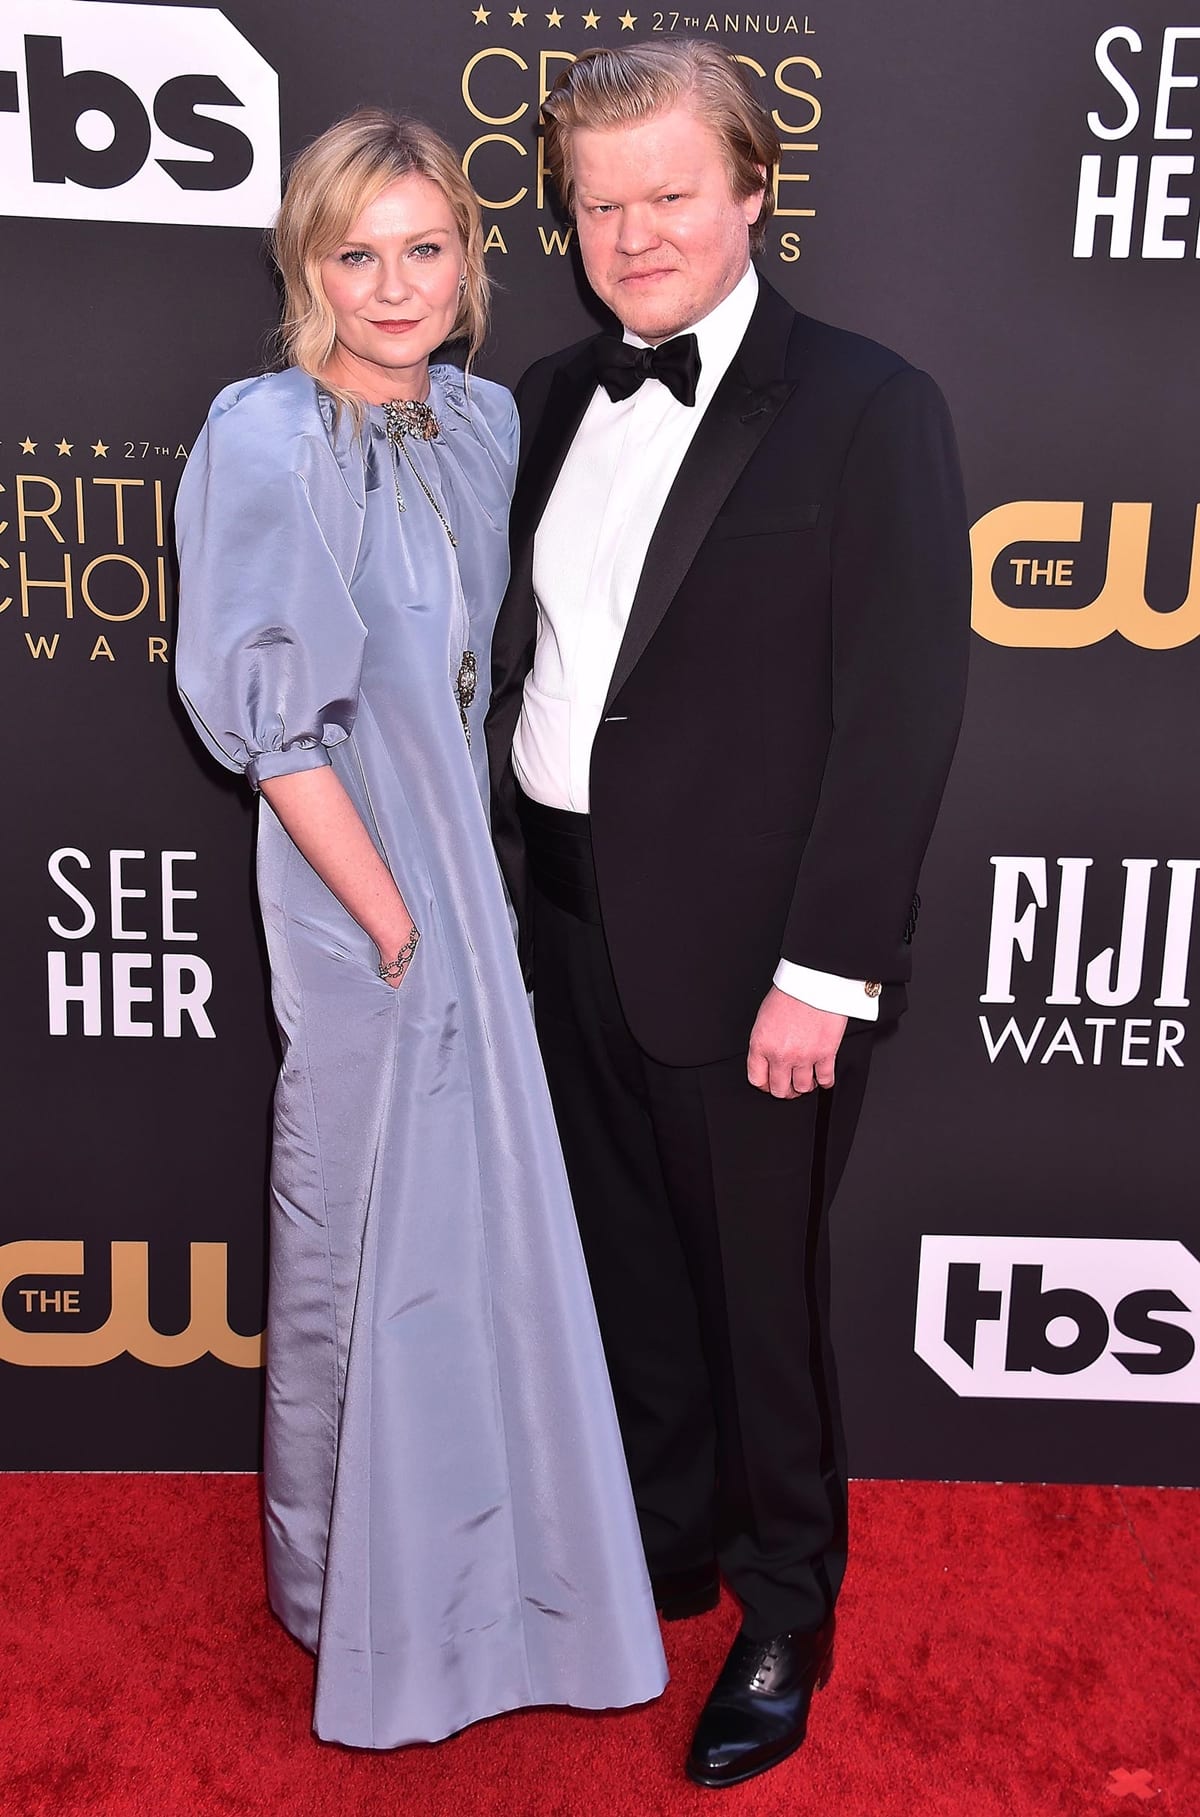 Jesse Plemons in a Giorgio Armani Made to Measure tuxedo and Santoni shoes and Kirsten Dunst in a silver-blue Julie de Libran Couture dress with bishop sleeves, Roger Vivier shoes, and Fred Leighton jewelry